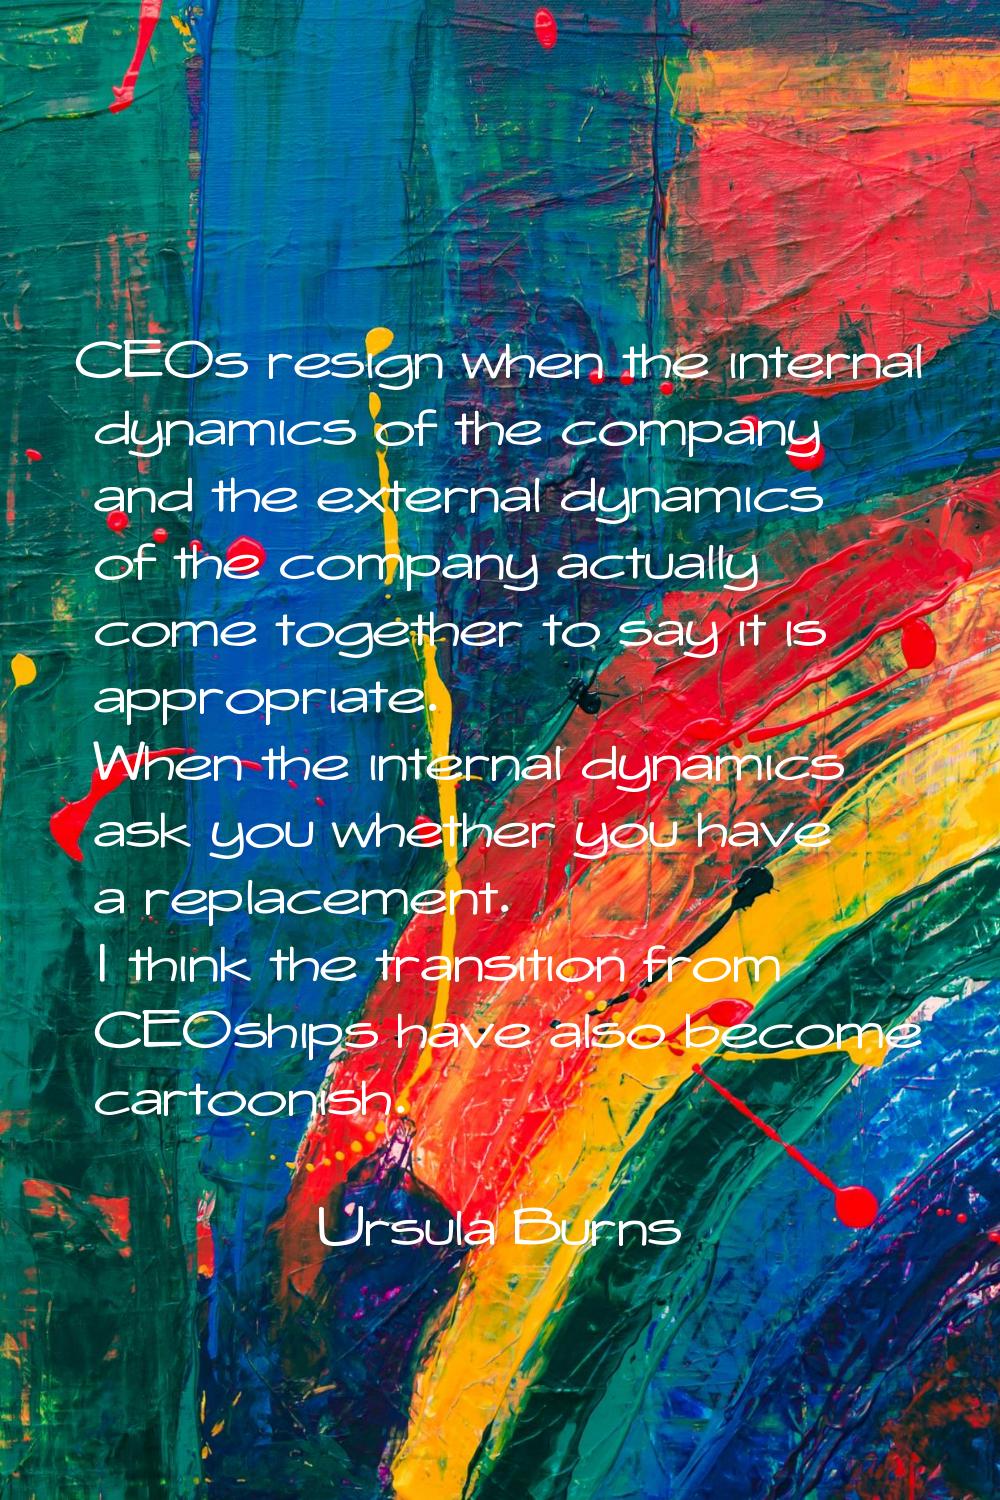 CEOs resign when the internal dynamics of the company and the external dynamics of the company actu